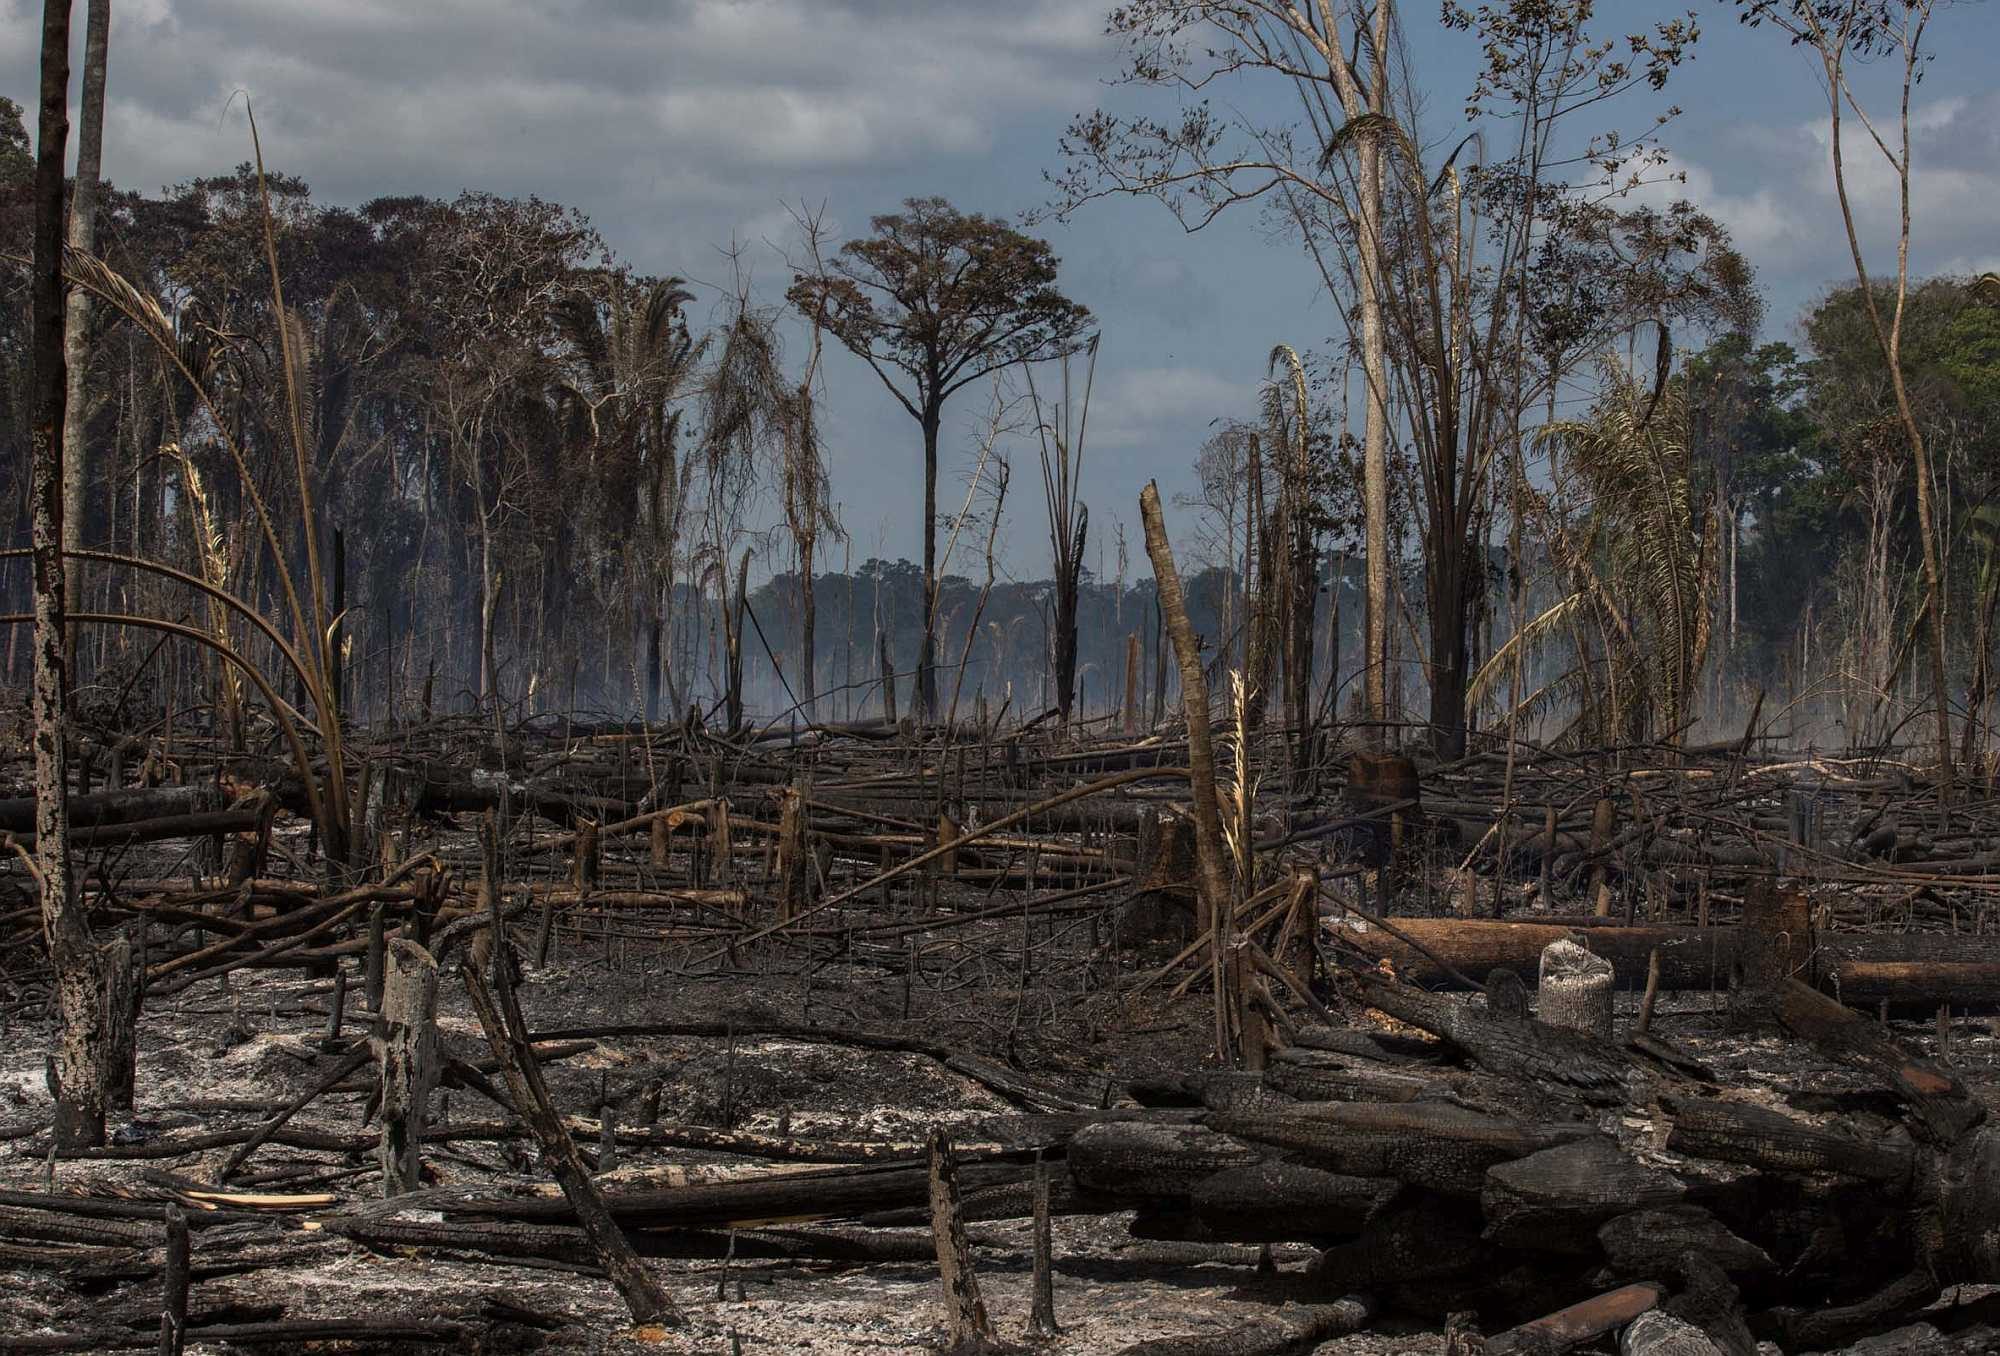 Tapajós National Forest set on fire, which is the cheapest way to get rid of the trees